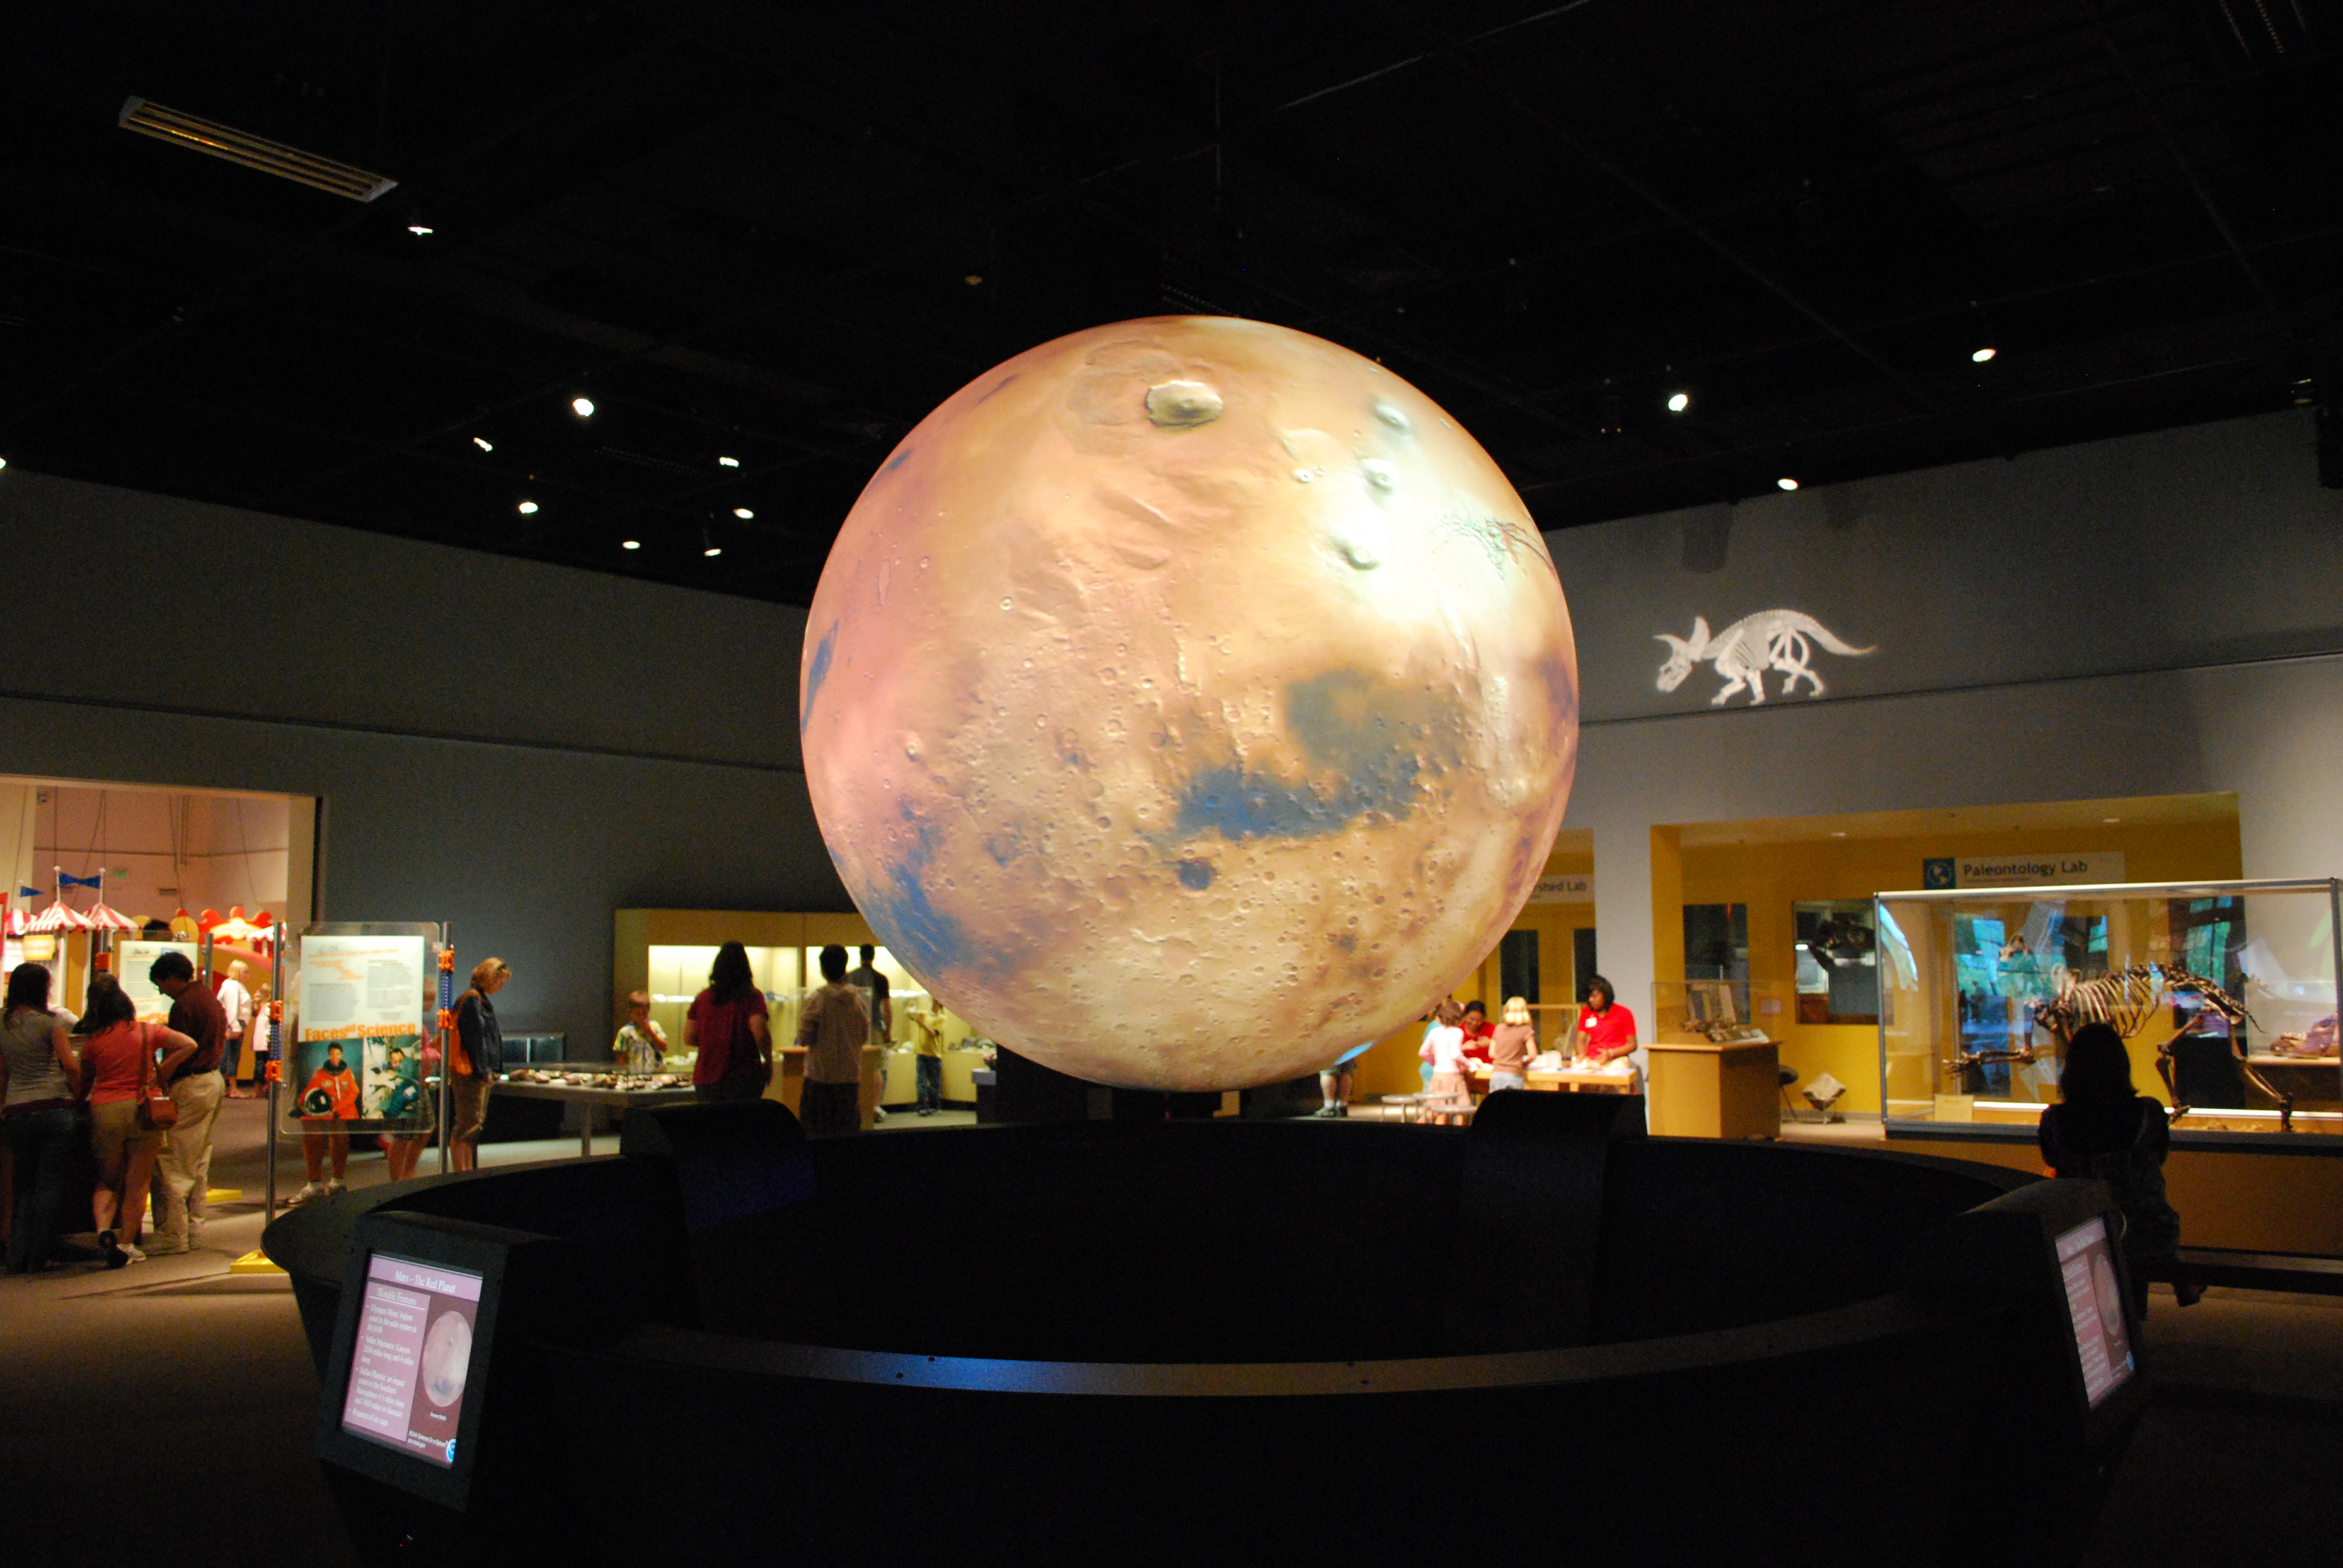 Science On a Sphere hangs in an exhibit hall displaying an image of Earth's moon. In the background, museum-goers explore other exhibits at the museum